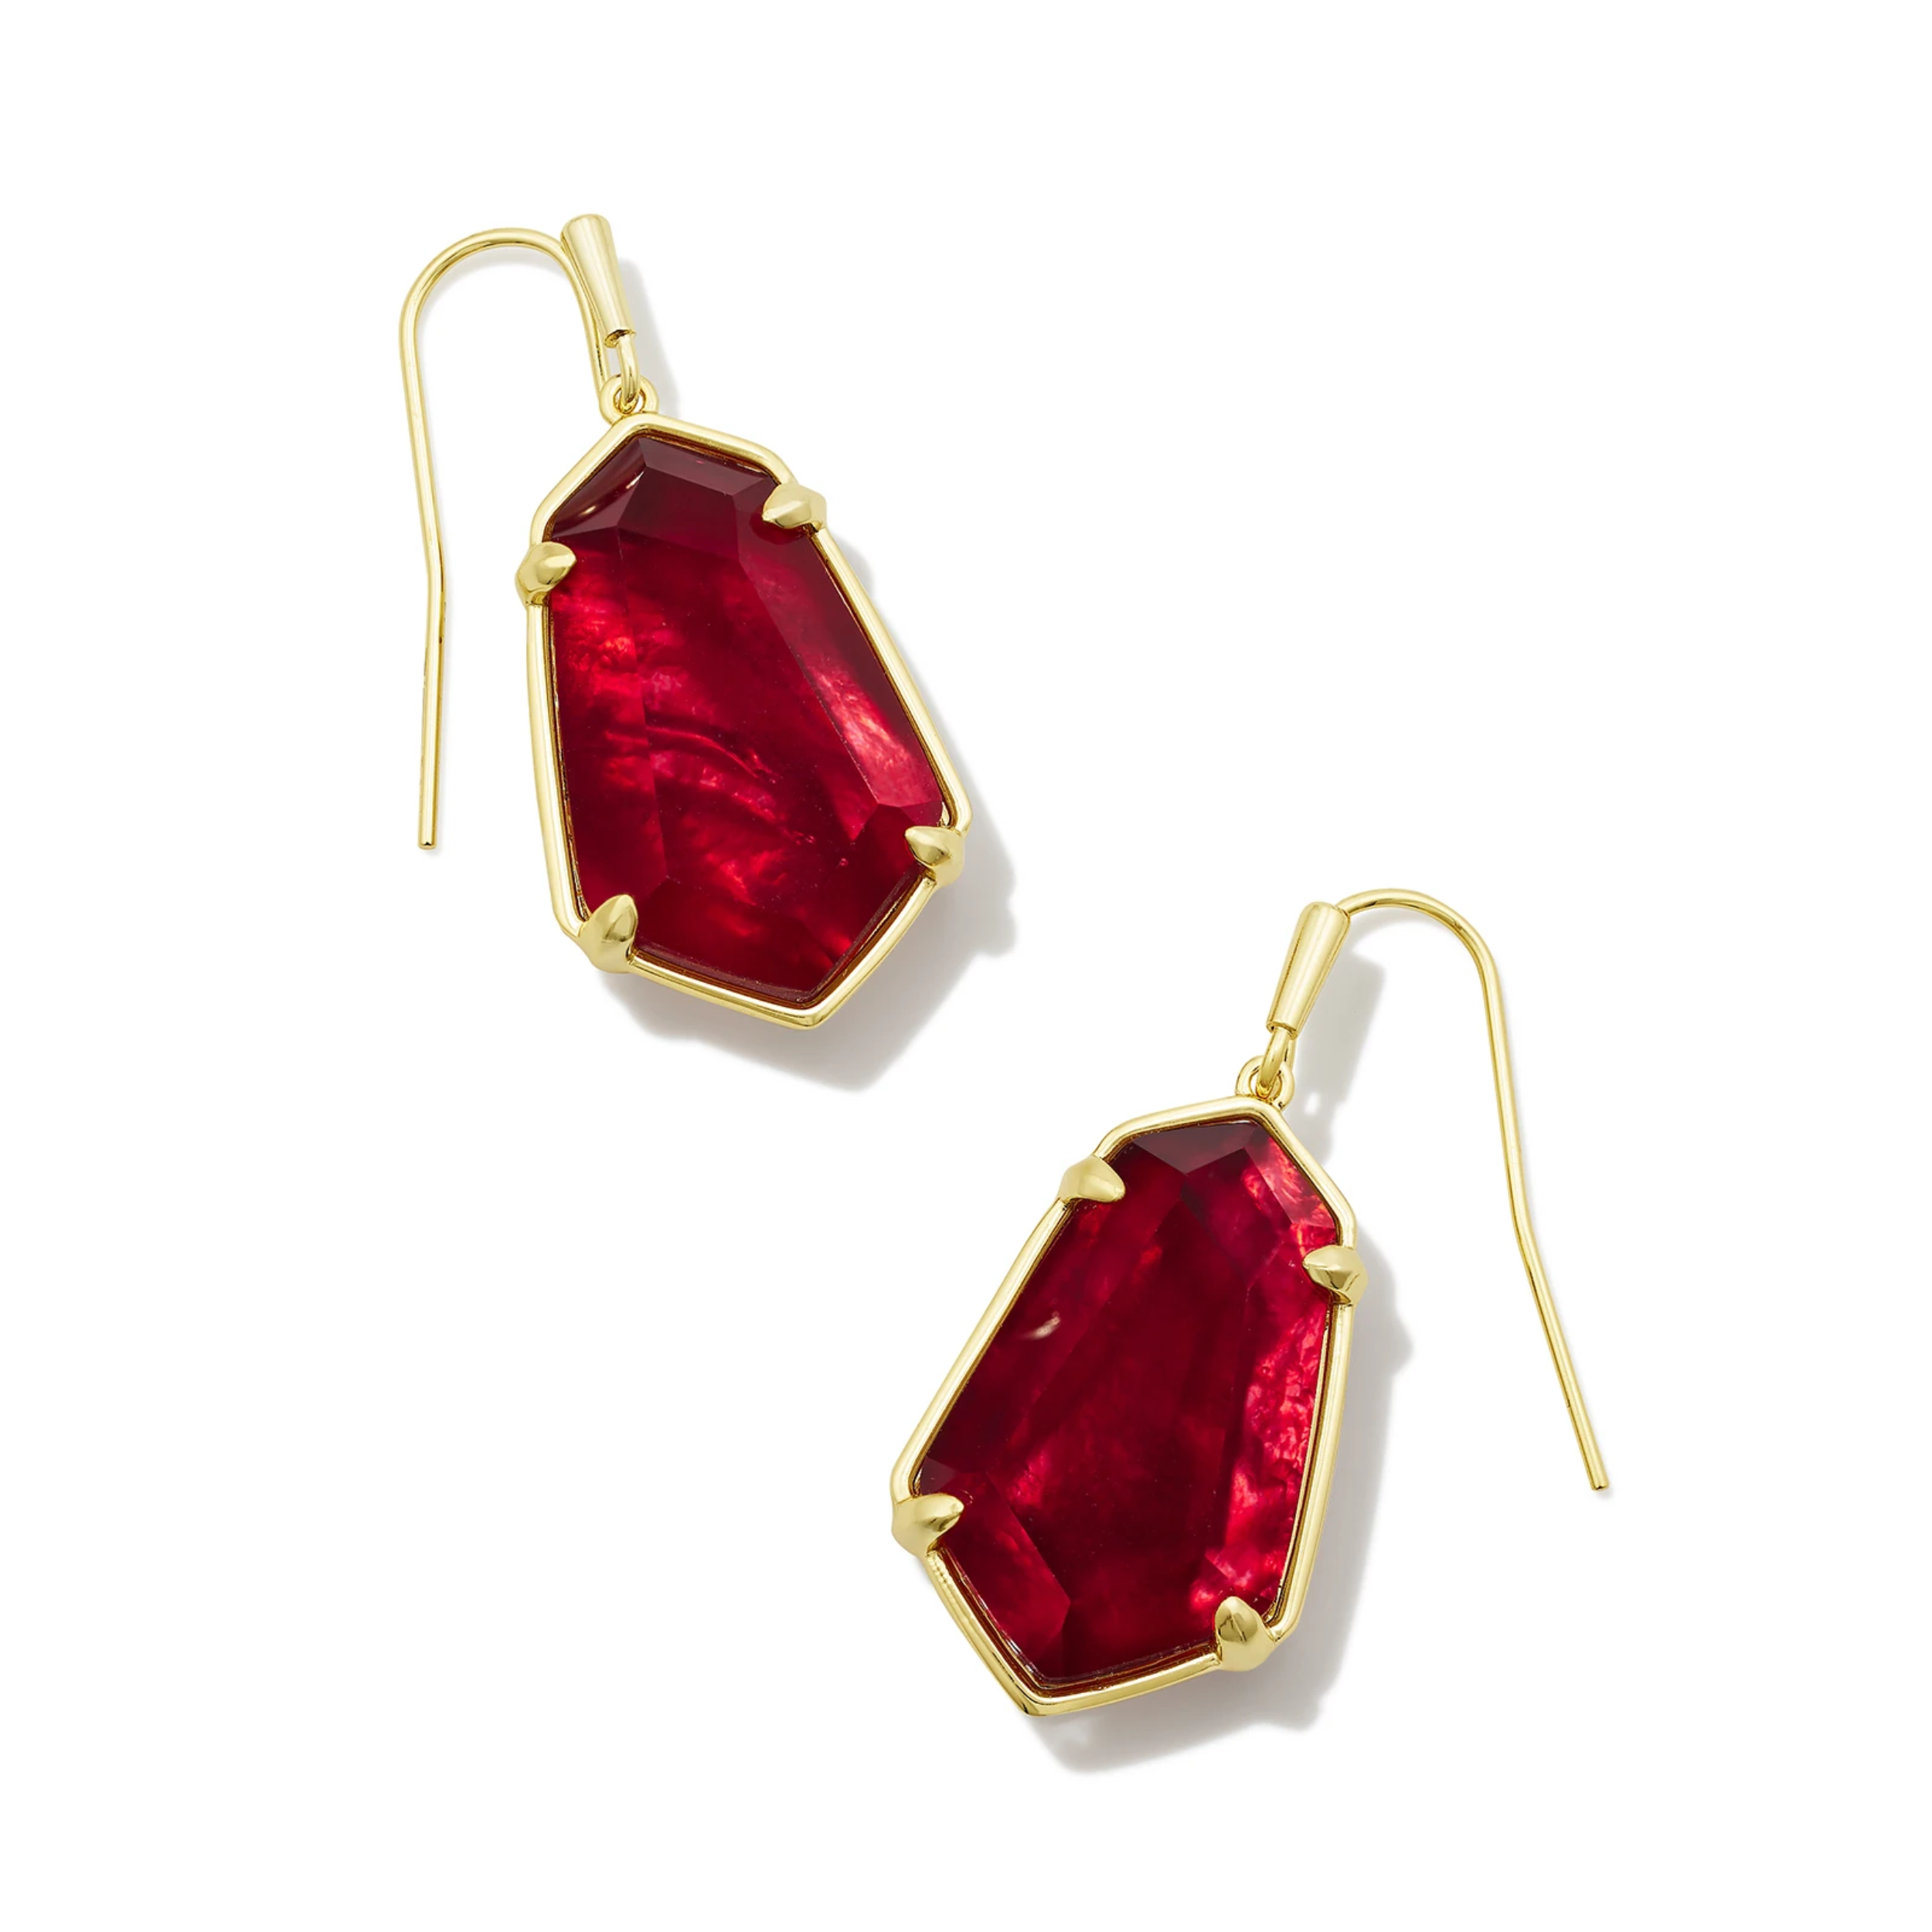 These Alexandria Gold Drop Earrings in Cranberry Illusion by Kendra Scott is pictured on a white background.